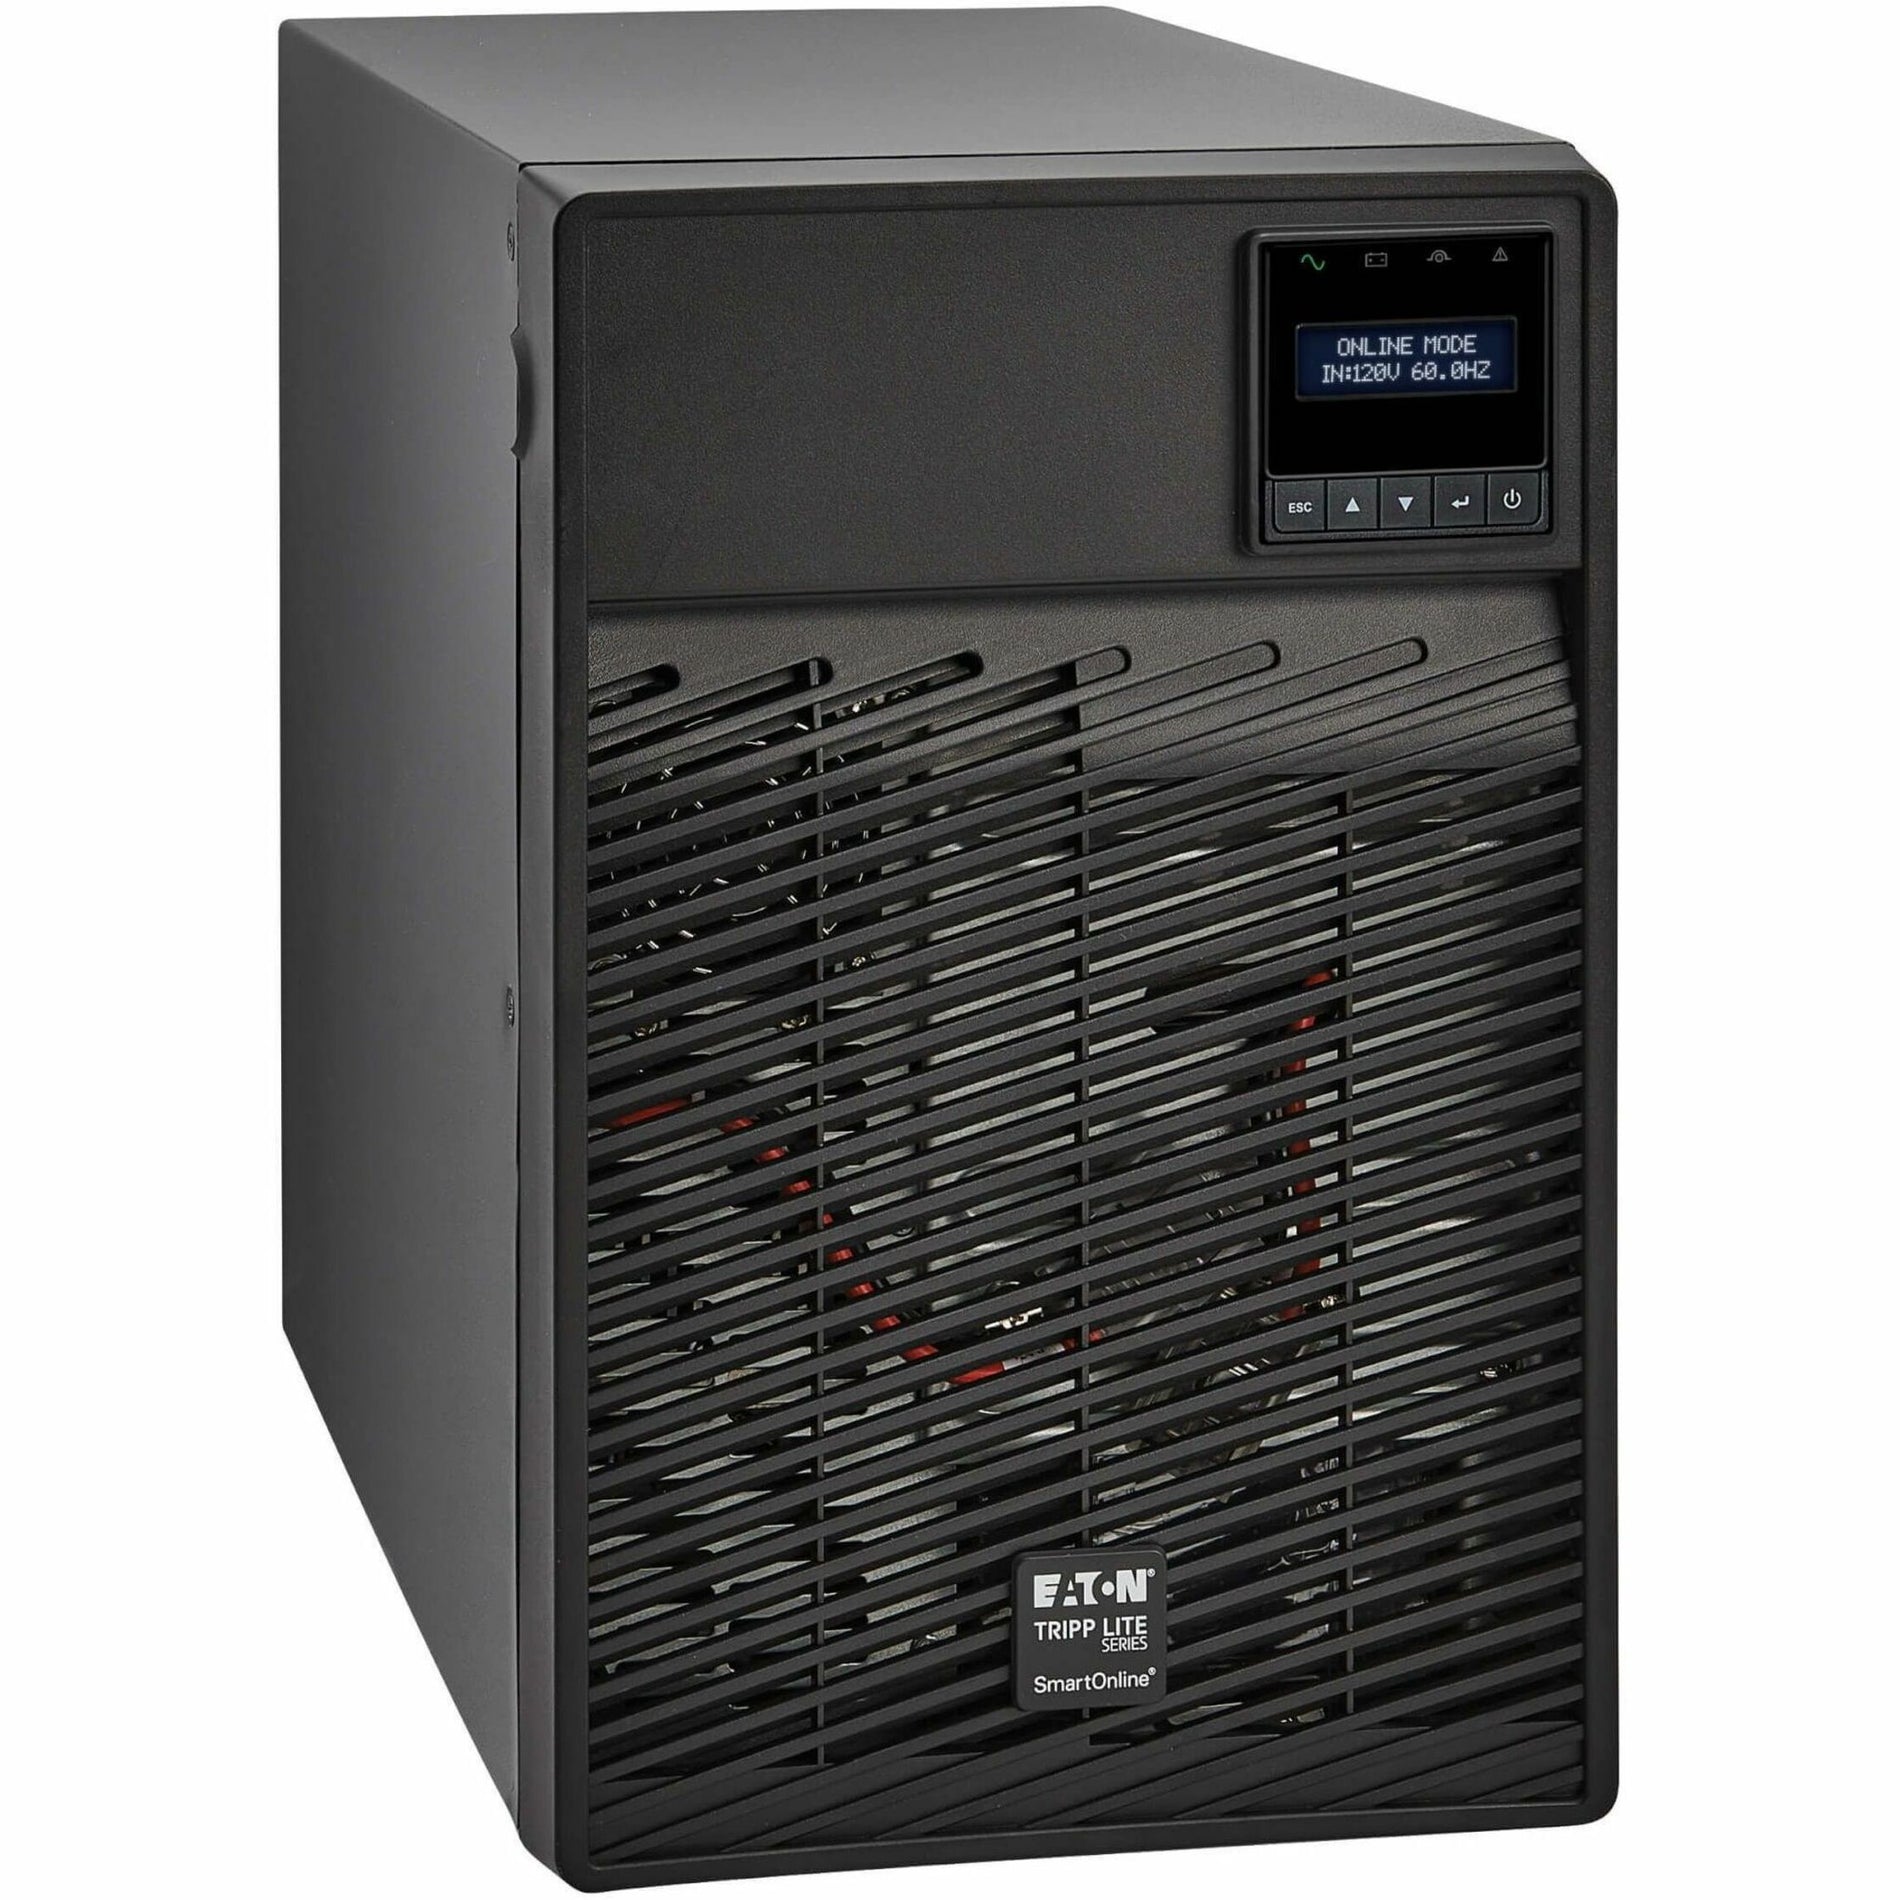 Tripp Lite SU3000XLCD SmartOnline 3000VA Tower UPS, 2700W Load Capacity, Hot Swappable Battery, SNMP Manageable